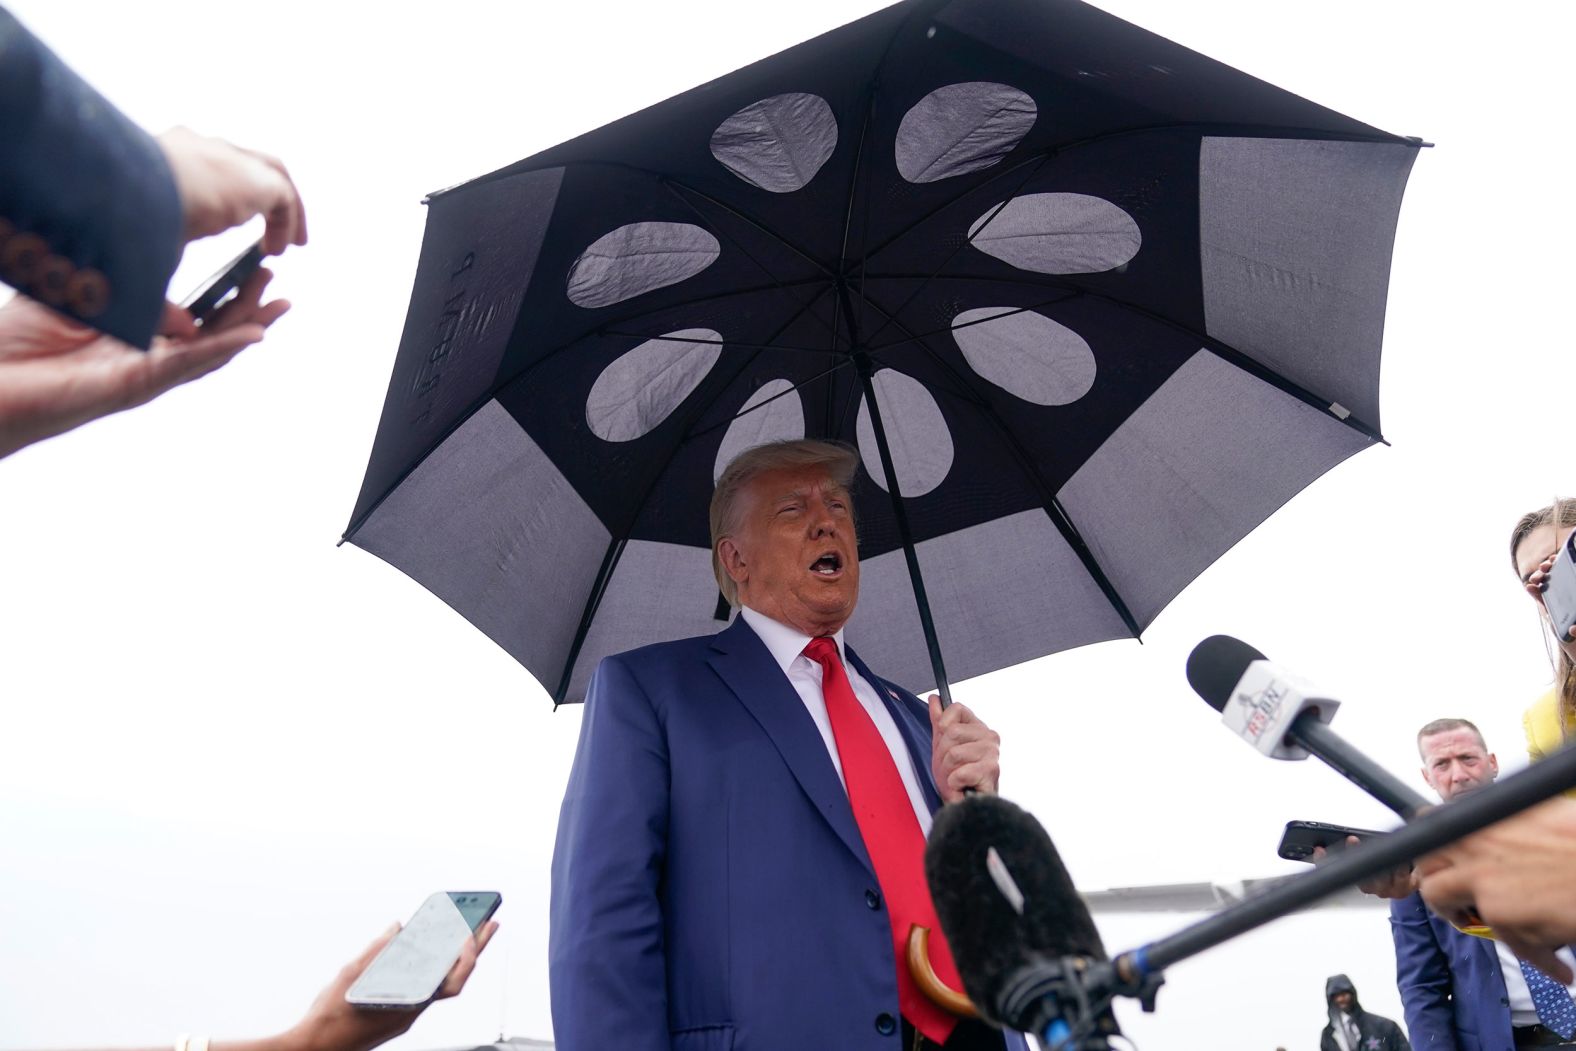 Trump speaks before boarding a plane in Arlington, Virginia, in August 2023. <a href="index.php?page=&url=https%3A%2F%2Fwww.cnn.com%2F2023%2F08%2F03%2Fpolitics%2Farraignment-trump-election-interference-indictment%2Findex.html" target="_blank">Trump pleaded not guilty</a> to four criminal charges related to his efforts to overturn the 2020 presidential election.